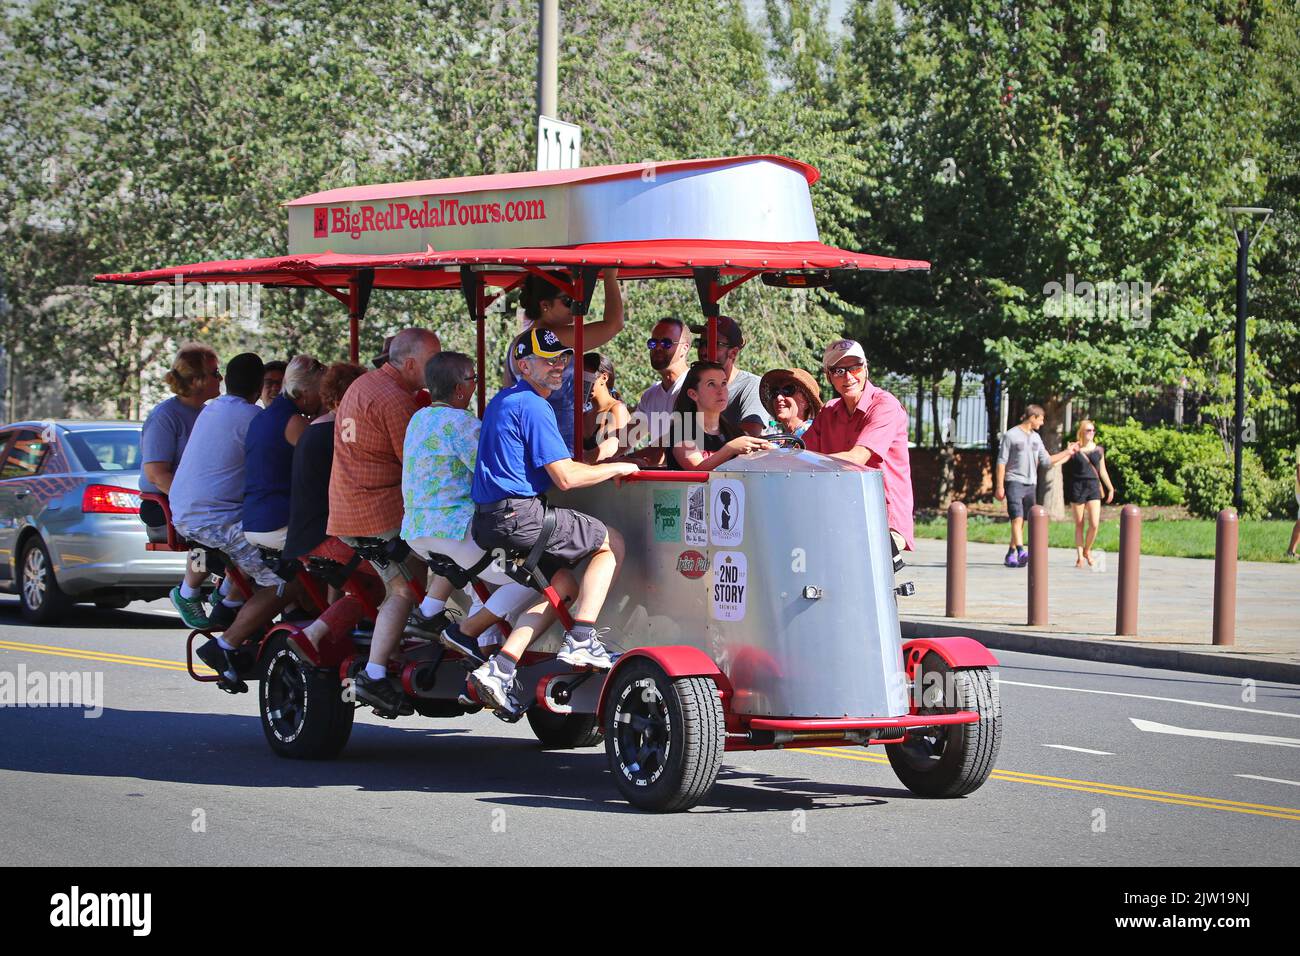 The unique Big Red Pedicycle is a bicycle bus carrying 15 assengers, powered by passengers' pedaling.  Philadelphia, USA - August 2019 Stock Photo